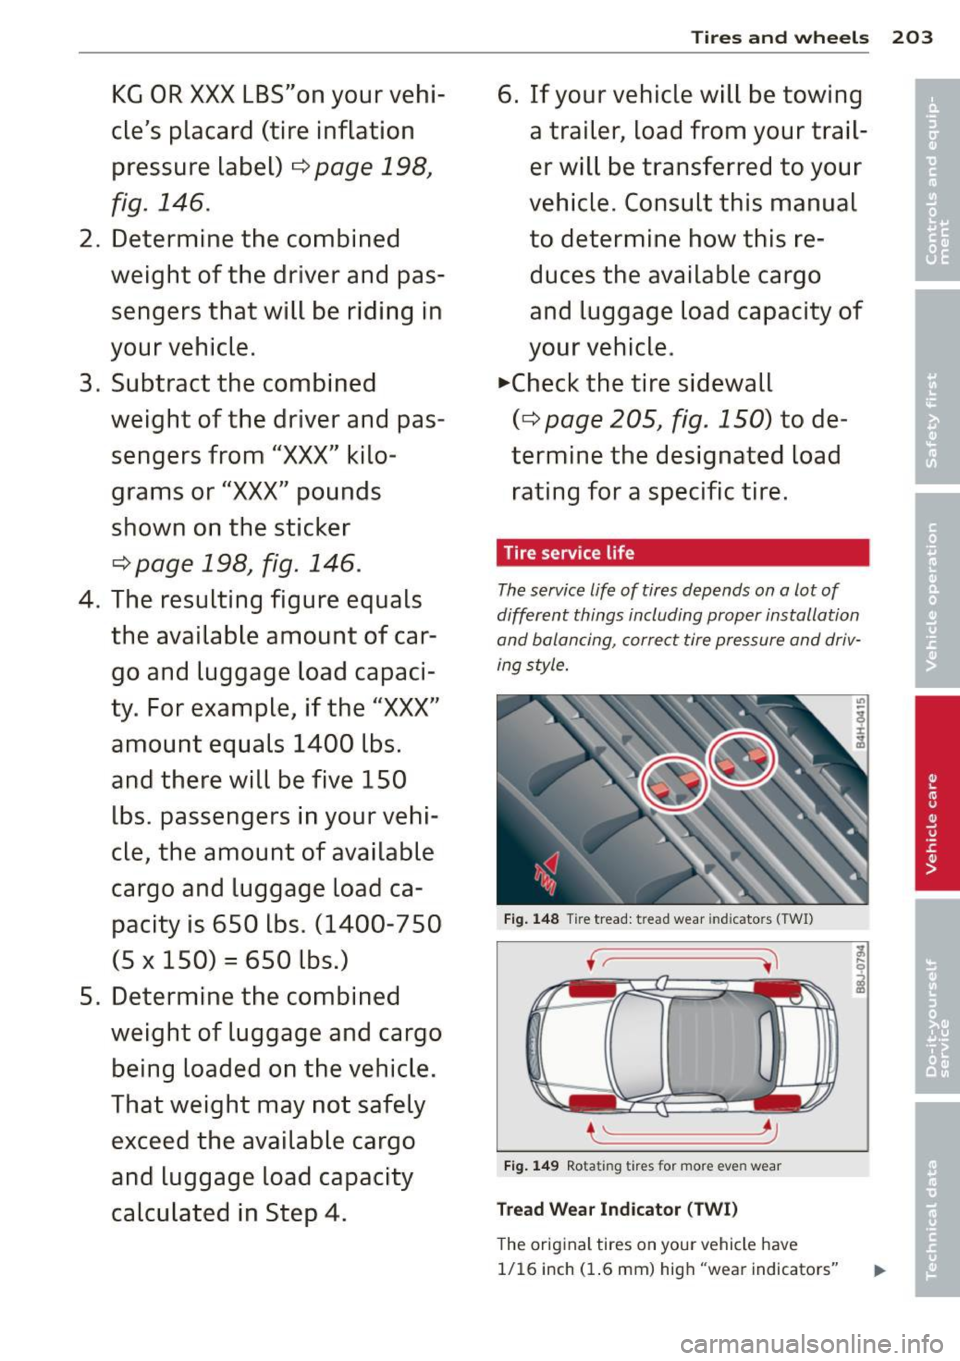 AUDI TT ROADSTER 2011  Owners Manual KG OR XXX LBS"on your  vehi­
cles  placard  (tire  inflation 
pressure  label) 
¢ page 198 , 
fig. 146. 
2. Determine  the  combined 
weight  of the  driver  and  pas­ s engers  that  will be  rid